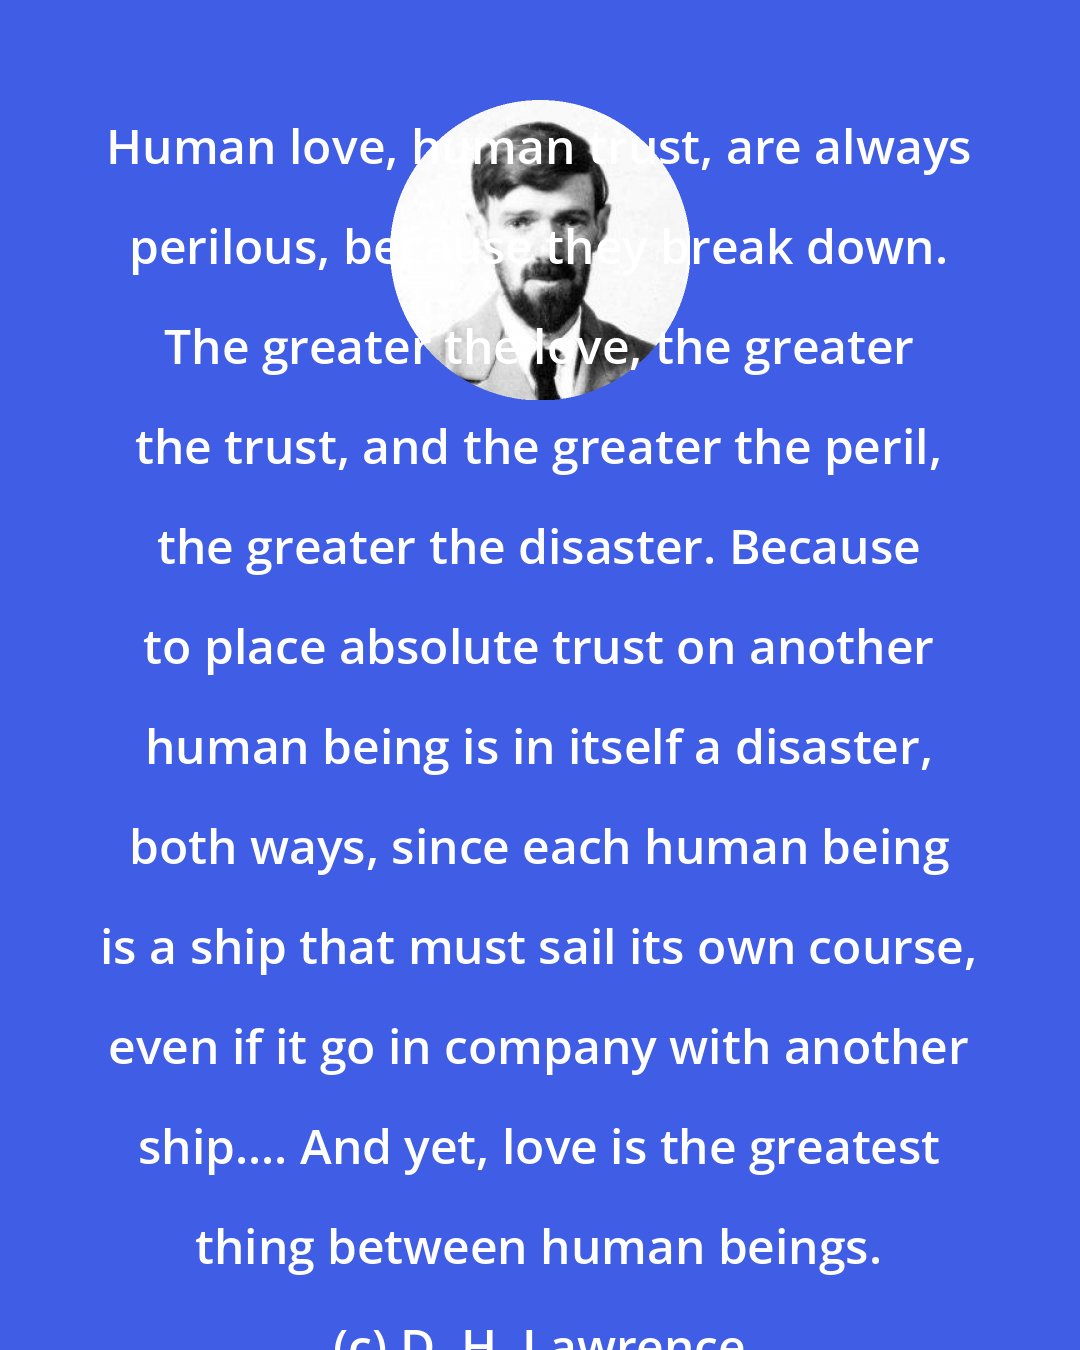 D. H. Lawrence: Human love, human trust, are always perilous, because they break down. The greater the love, the greater the trust, and the greater the peril, the greater the disaster. Because to place absolute trust on another human being is in itself a disaster, both ways, since each human being is a ship that must sail its own course, even if it go in company with another ship.... And yet, love is the greatest thing between human beings.